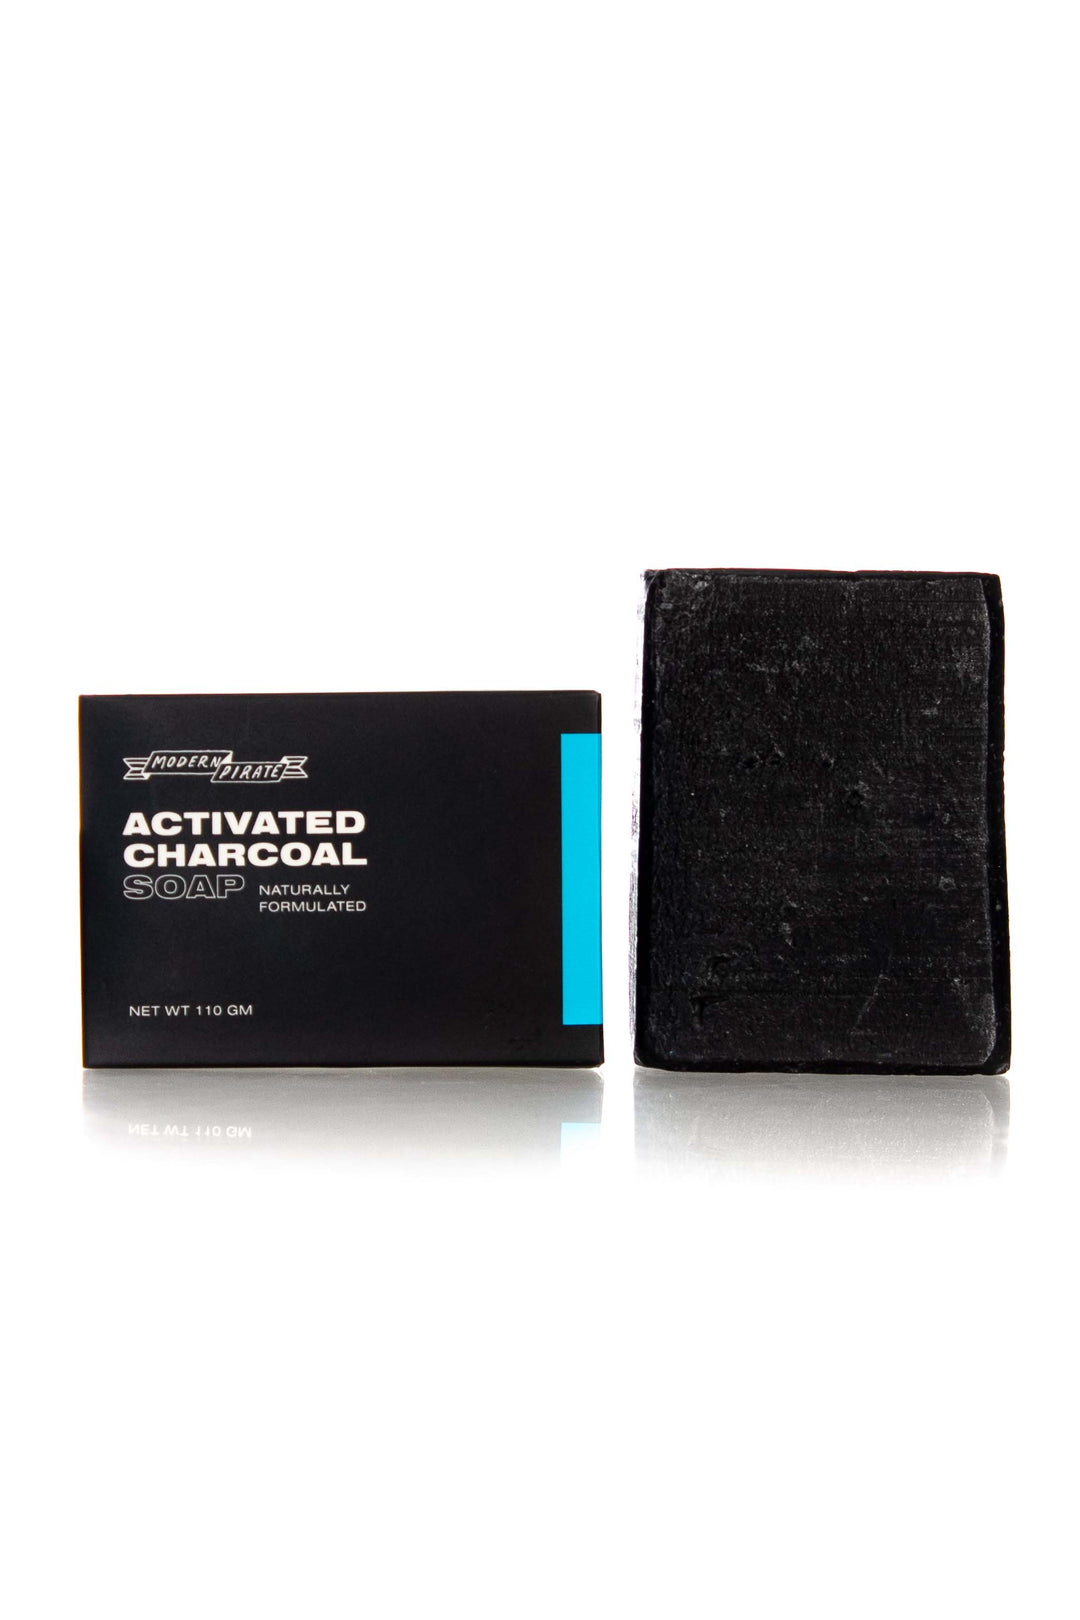 MODERN PIRATE TROUBLE THY WATERS ACTIVATED CHARCOAL SOAP 110G